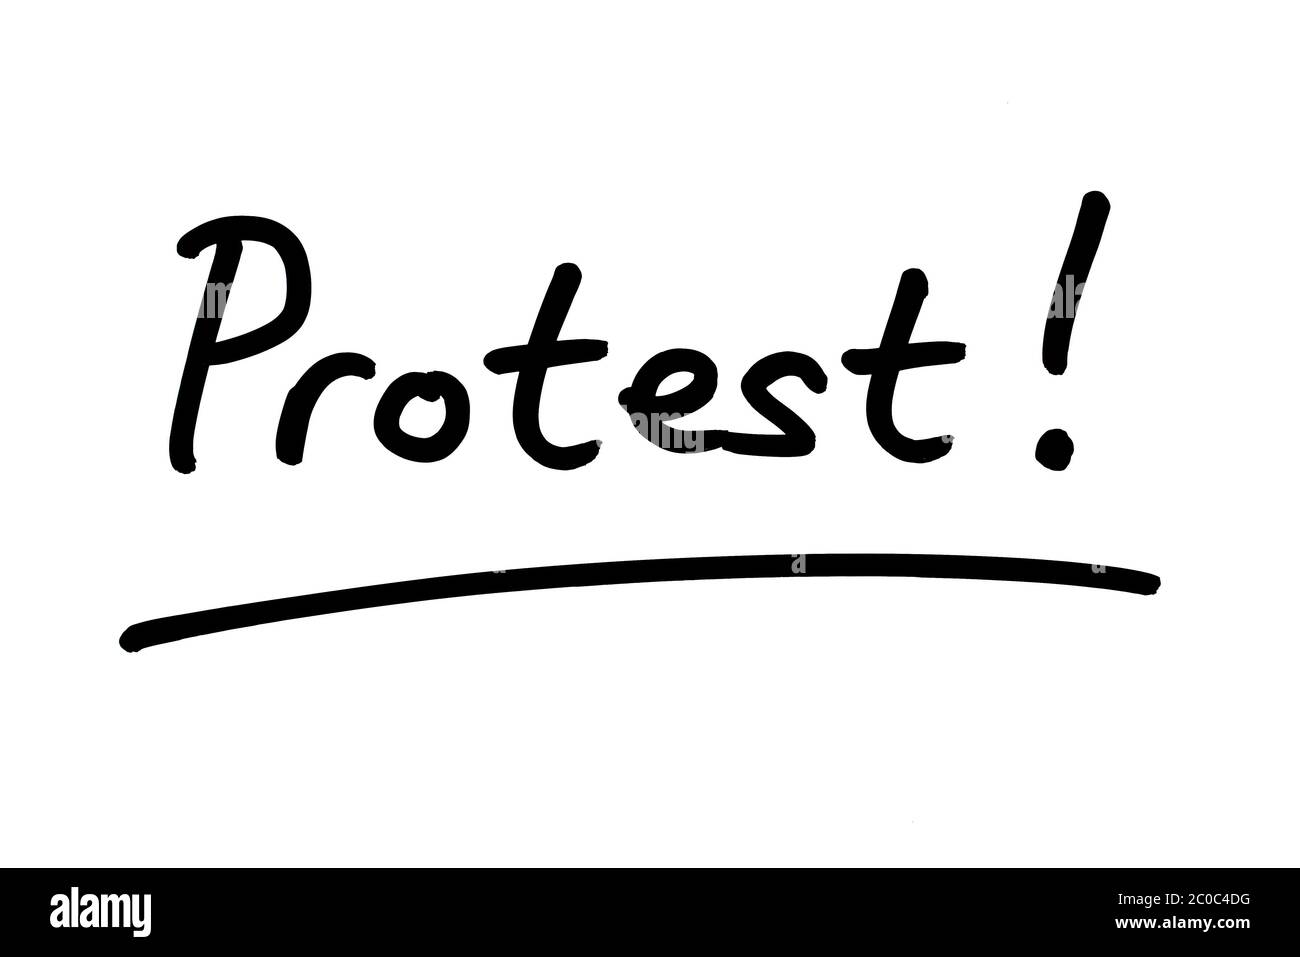 Protest! handwritten on a white background. Stock Photo